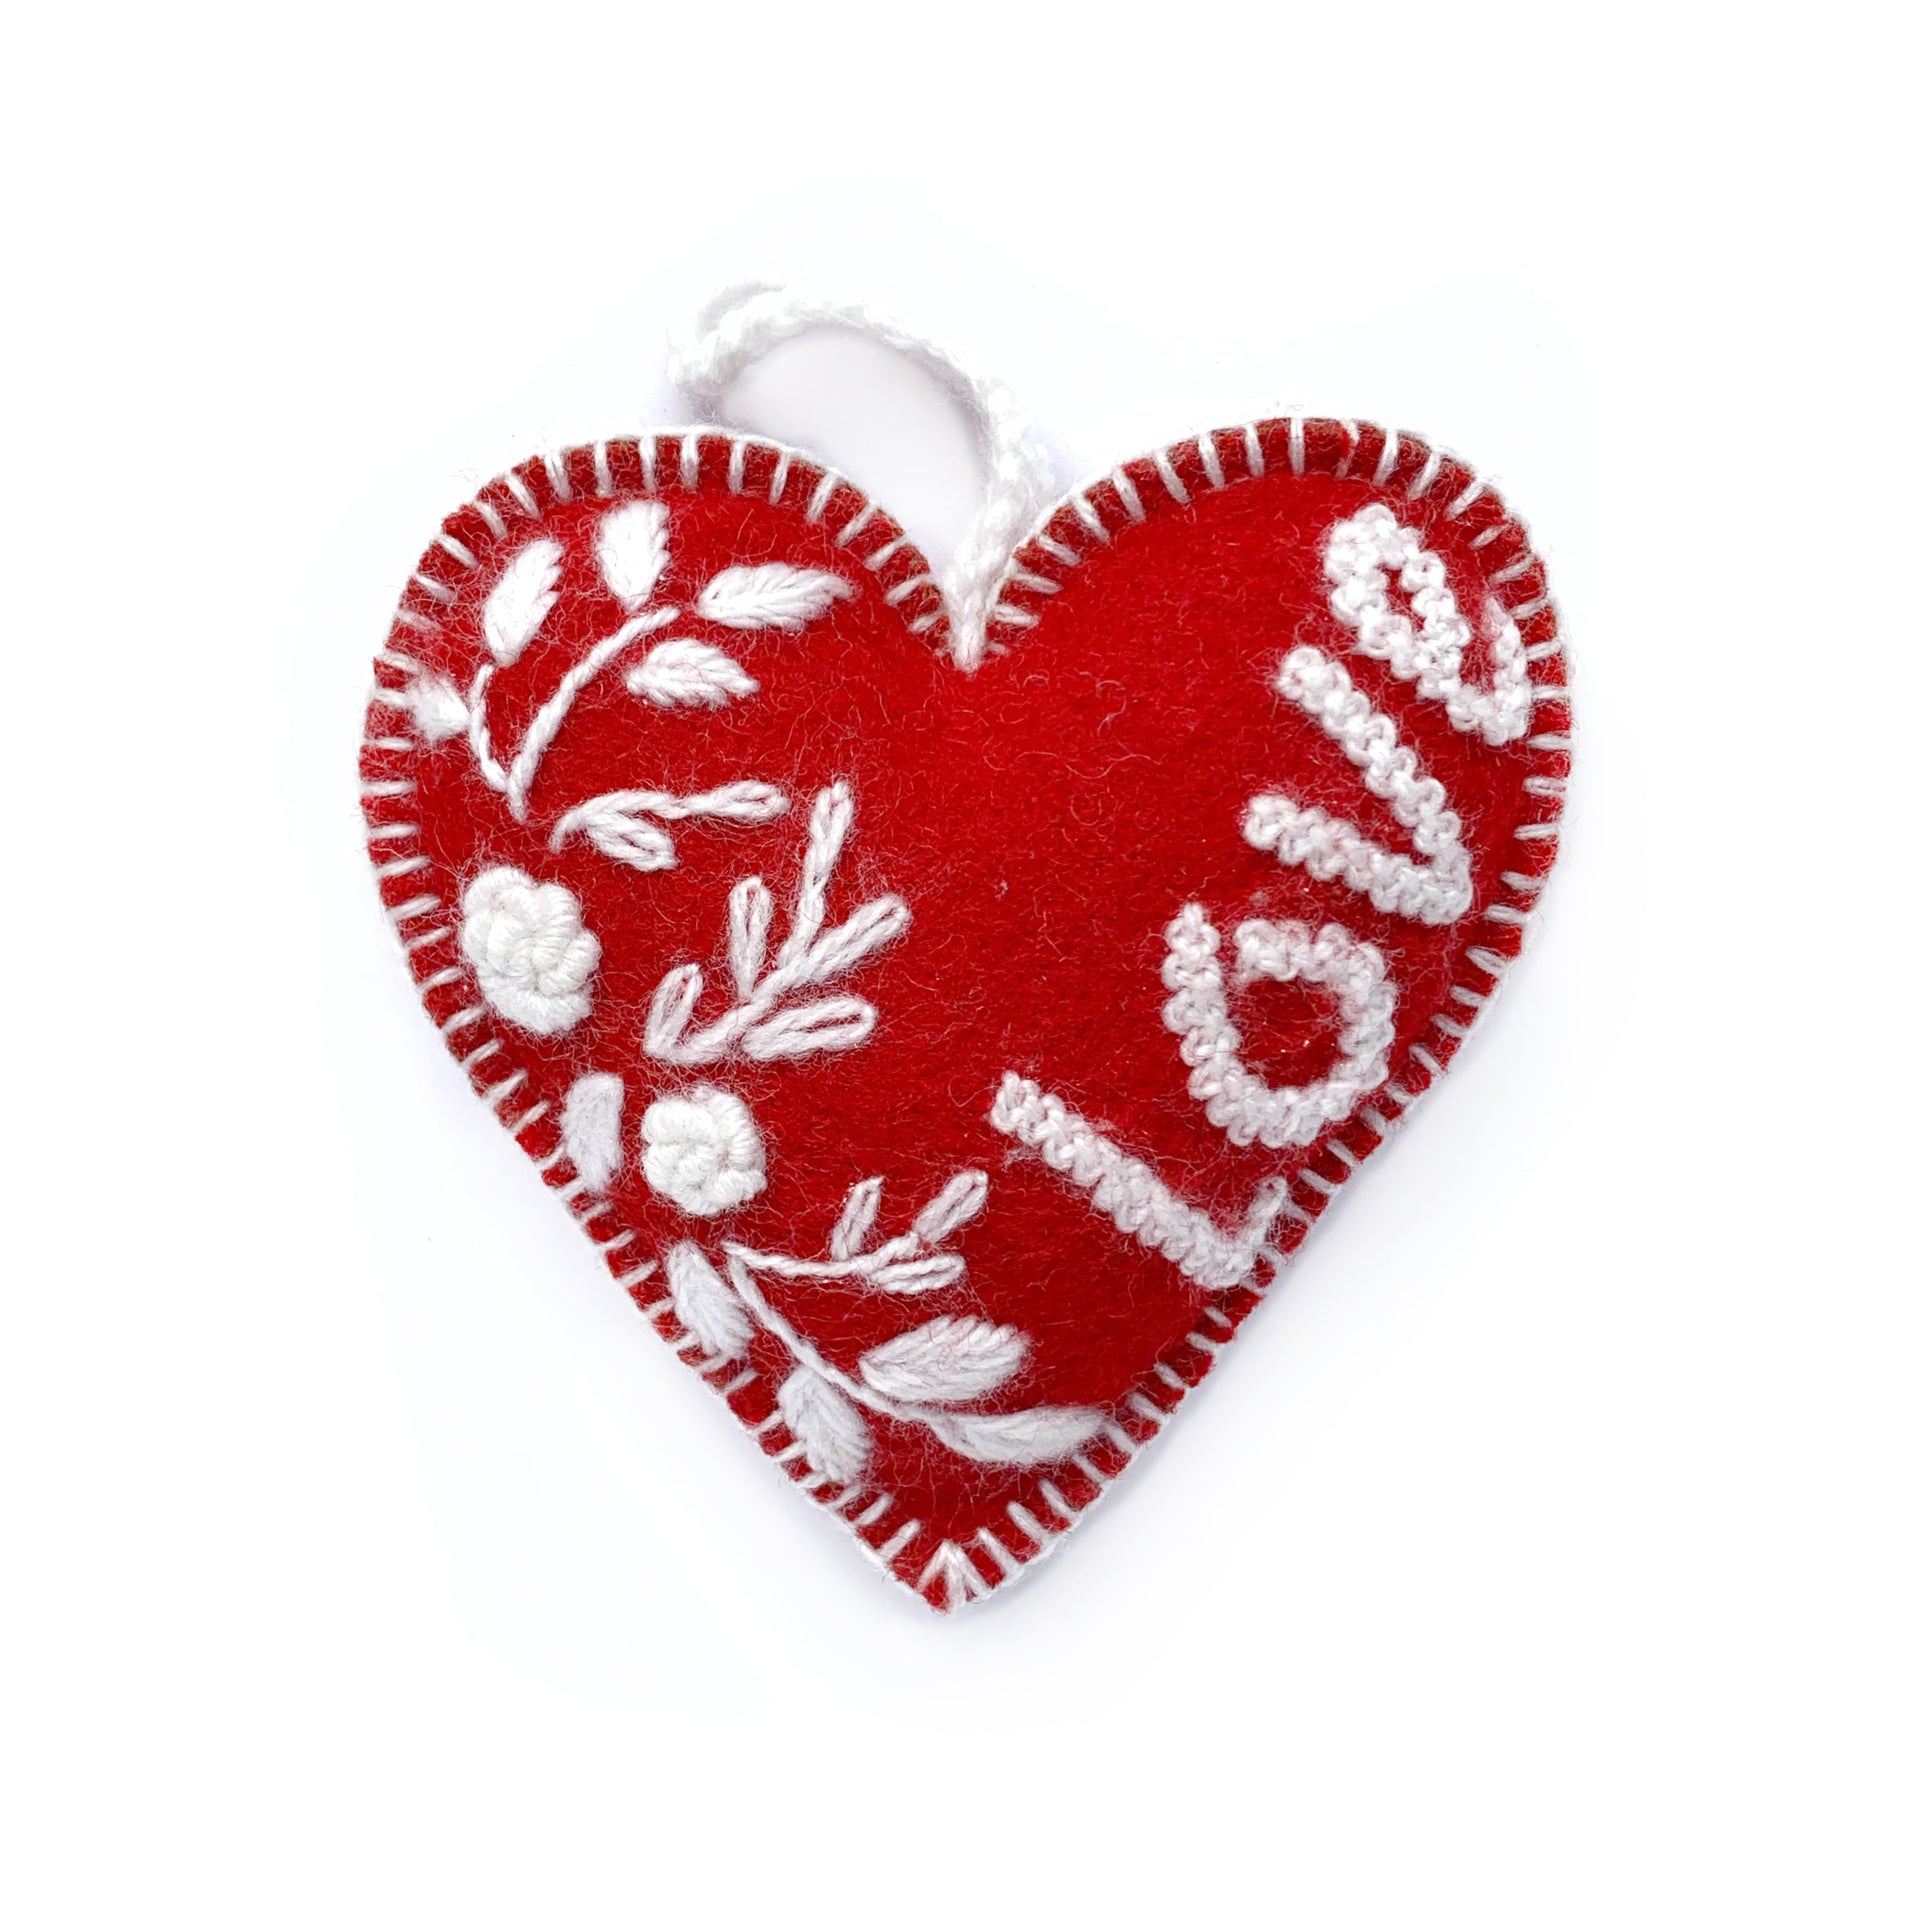 LOVE Heart Valentine's Ornament, Embroidered Wool